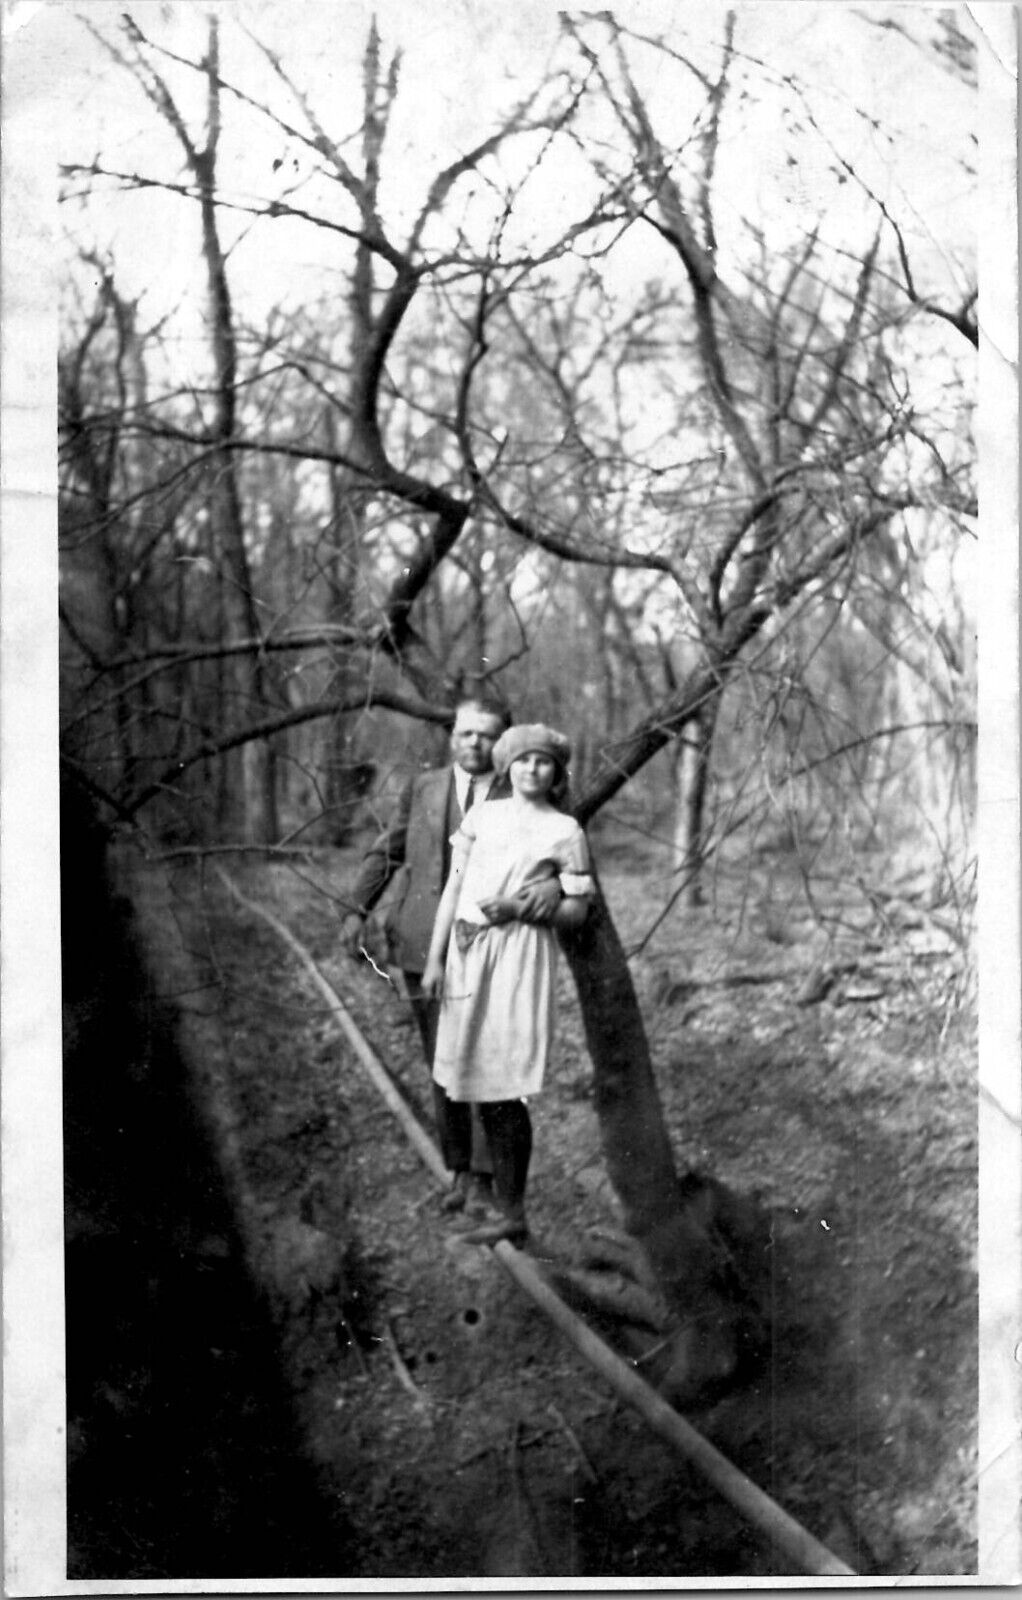 SUSPICIOUS COUPLE SPOTTED IN A MYSTERIOUS FOREST CREEPY ~ 1920s VINTAGE PHOTO